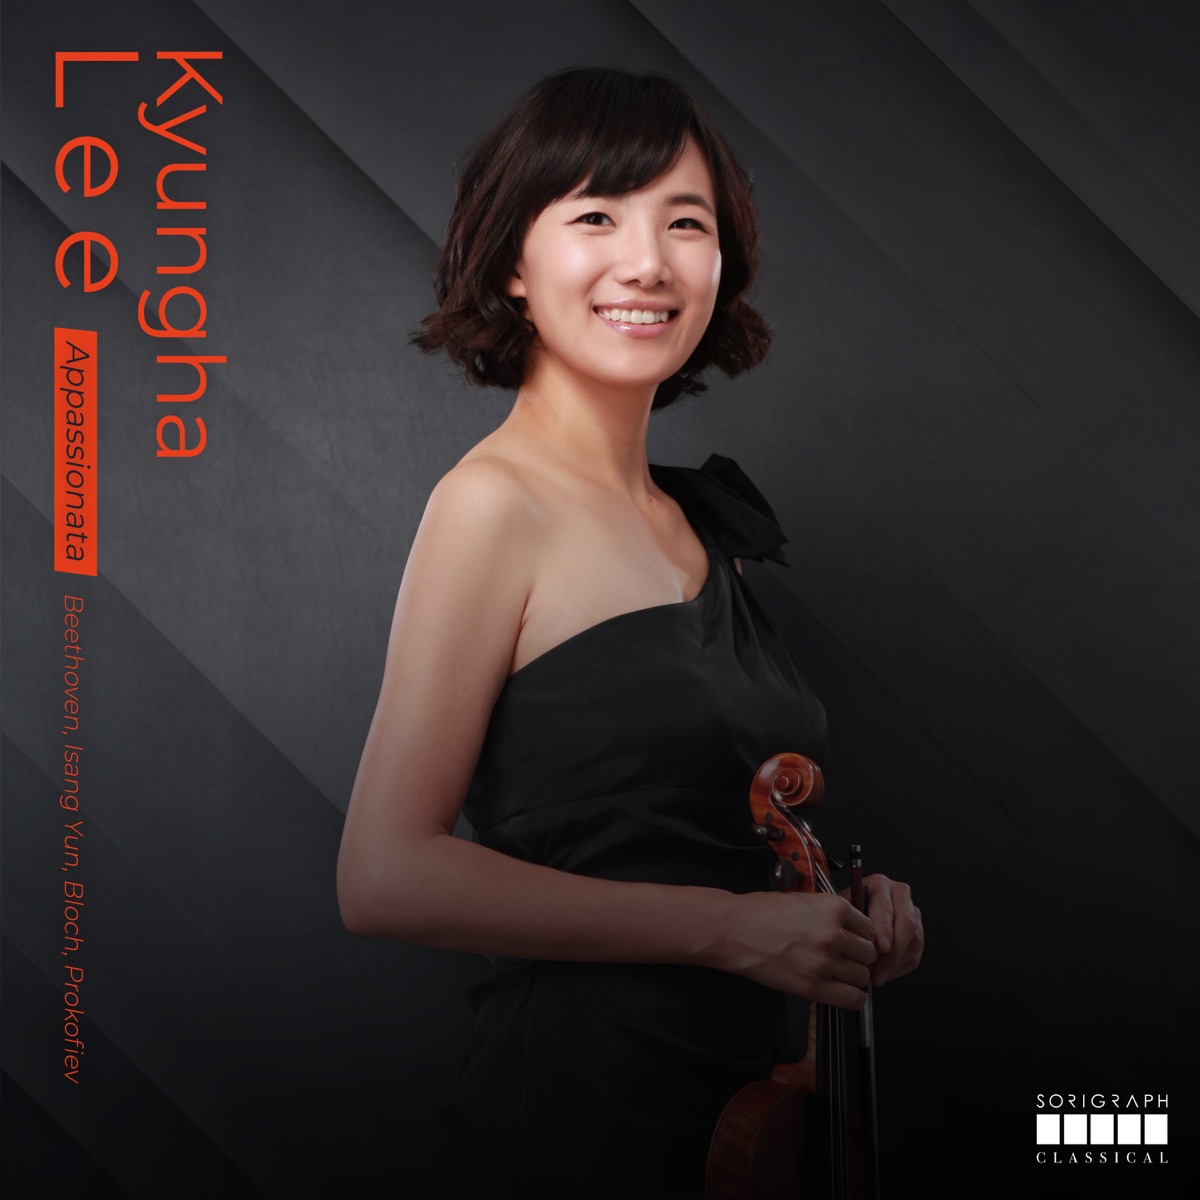 French Chic: Debussy, Ravel, Franck, Chausson - Album by Kyungha Lee -  Apple Music